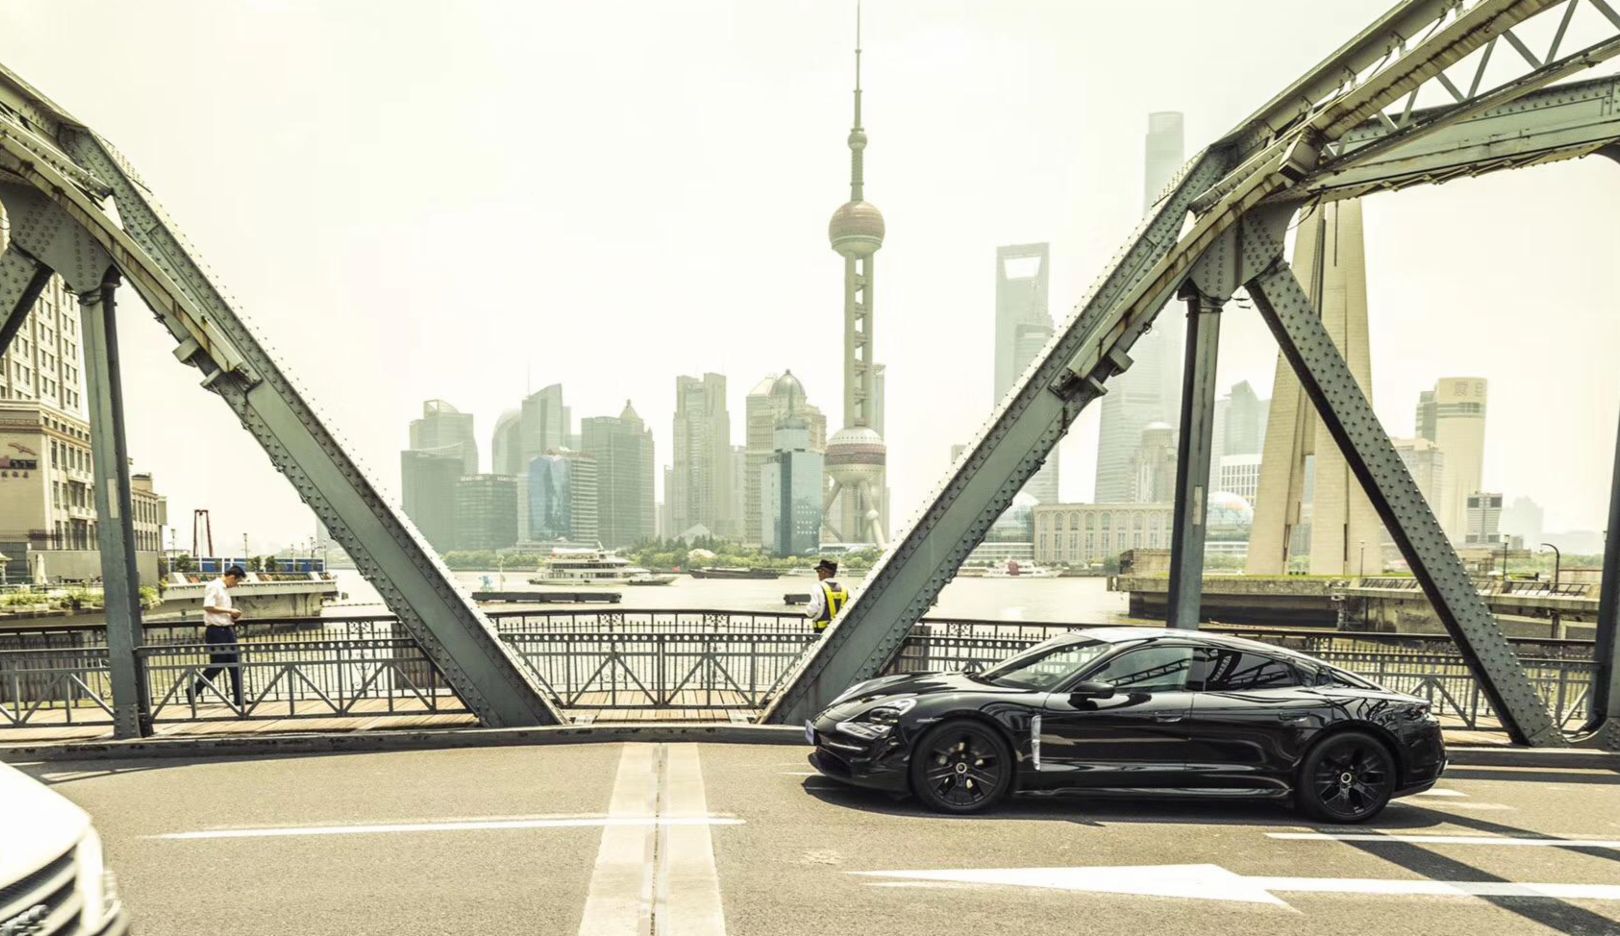 Kicking off in China: the Porsche Taycan visits Shanghai